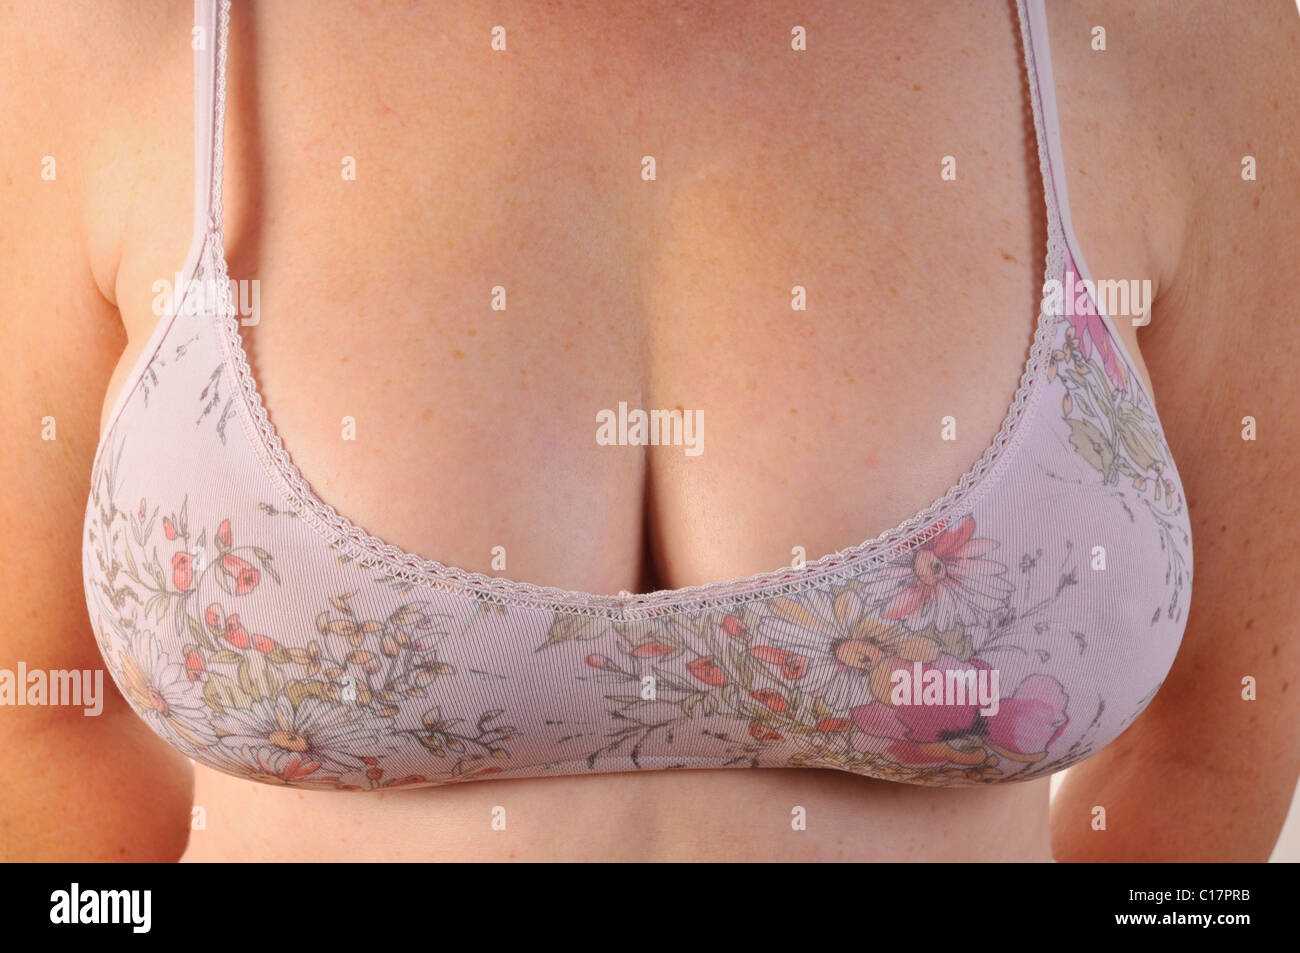 Woman wearing a badly fitting, too small bra Stock Photo - Alamy